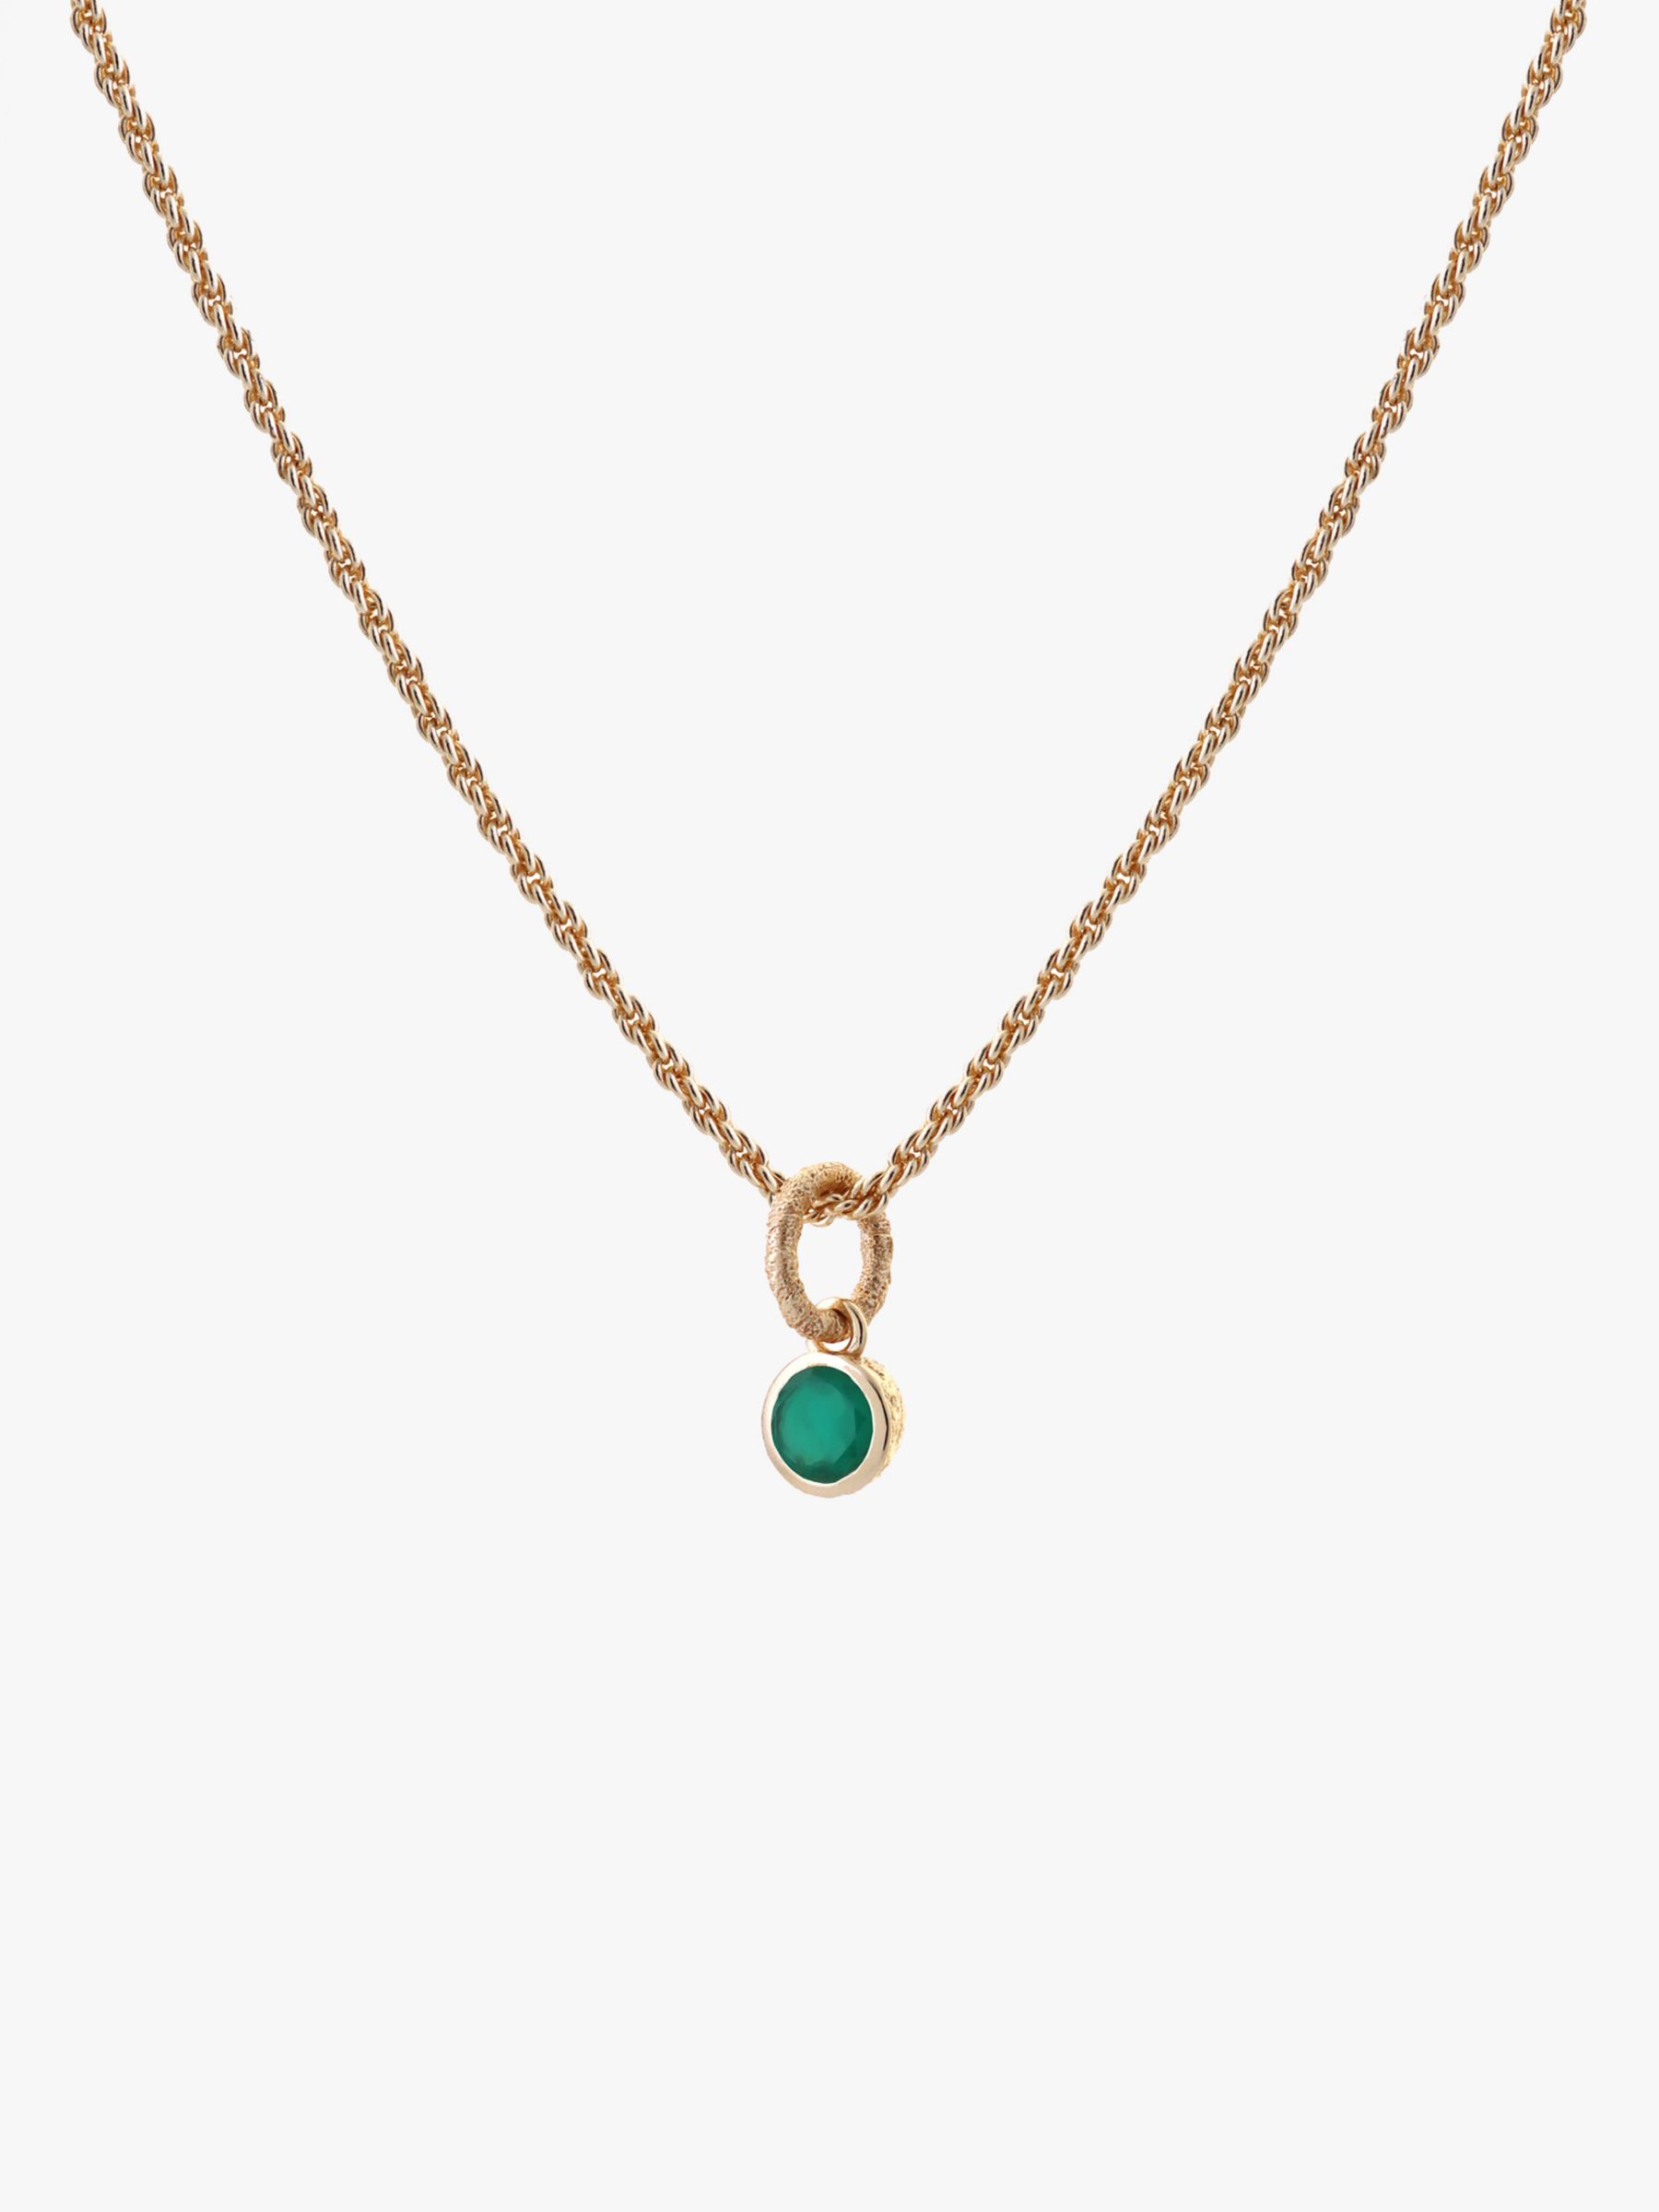 Tutti & Co May Birthstone Necklace, Green Onyx, Gold at John Lewis ...